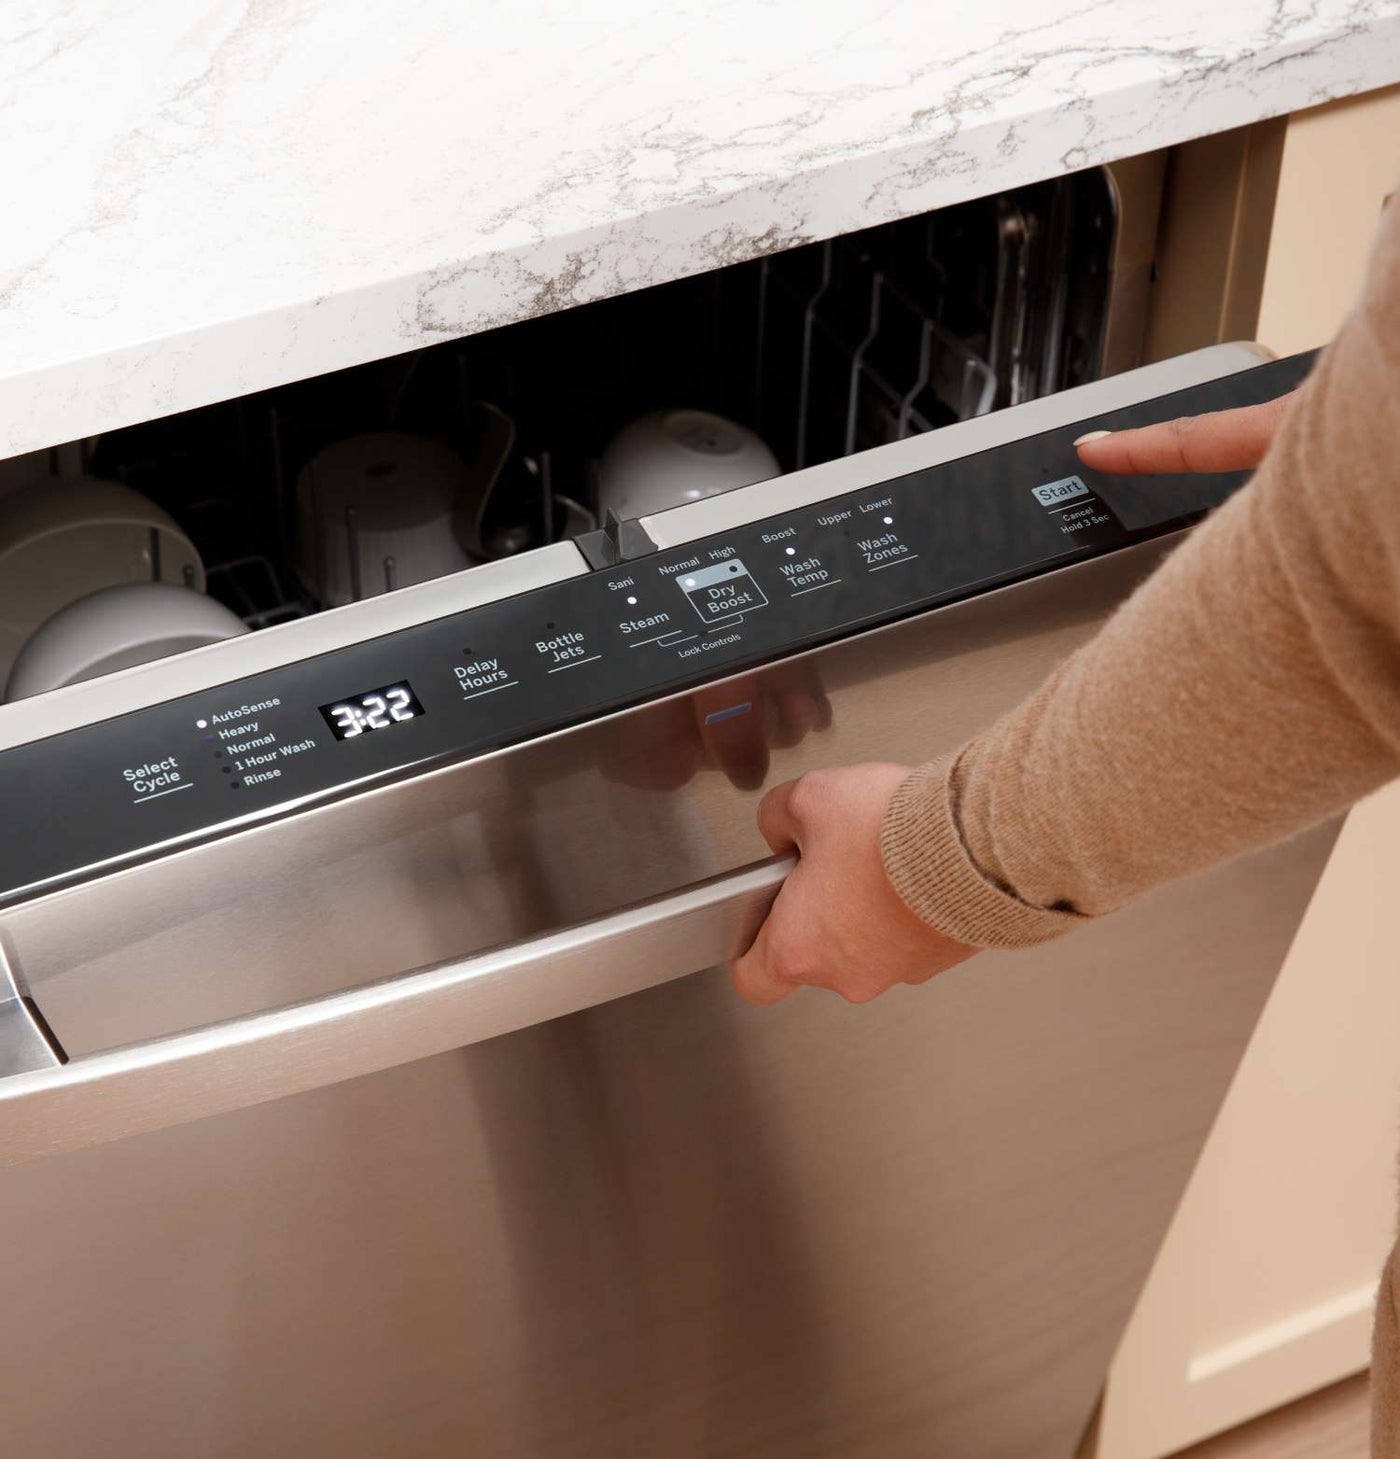 GE 24" Fingerprint Resistant Stainless Steel Top Control Dishwasher with Stainless Steel Interior and Third Rack - GDT670SYVFS